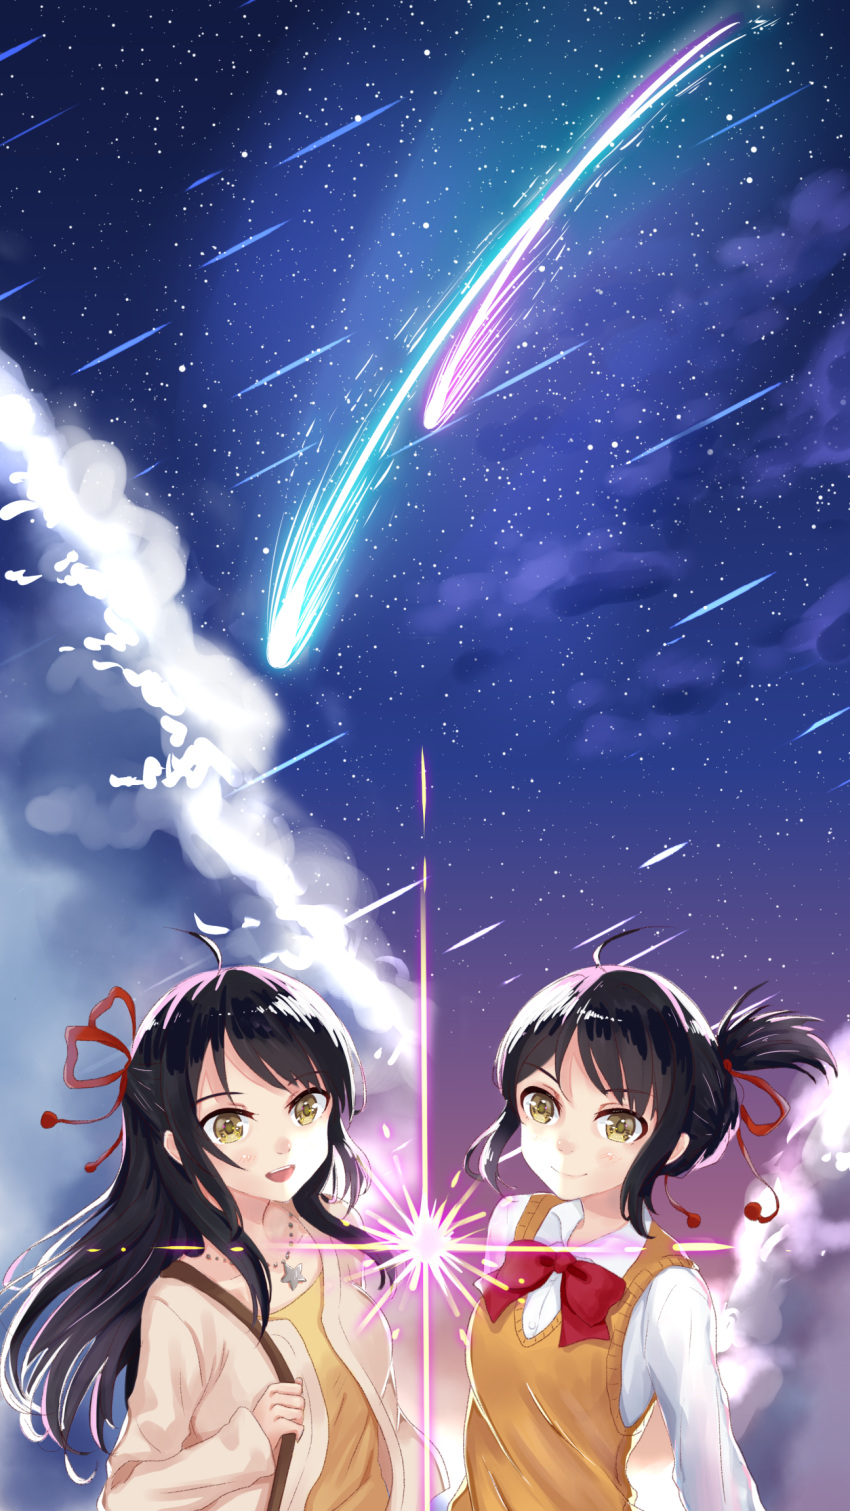 2girls black_hair blush brown_eyes clouds comet commentary_request diffraction_spikes dual_persona hair_ribbon highres jewelry kimi_no_na_wa long_hair looking_at_viewer mahou_shounen miyamizu_mitsuha multiple_girls night night_sky older pendant red_ribbon ribbon sky star_(sky) star_necklace starry_sky